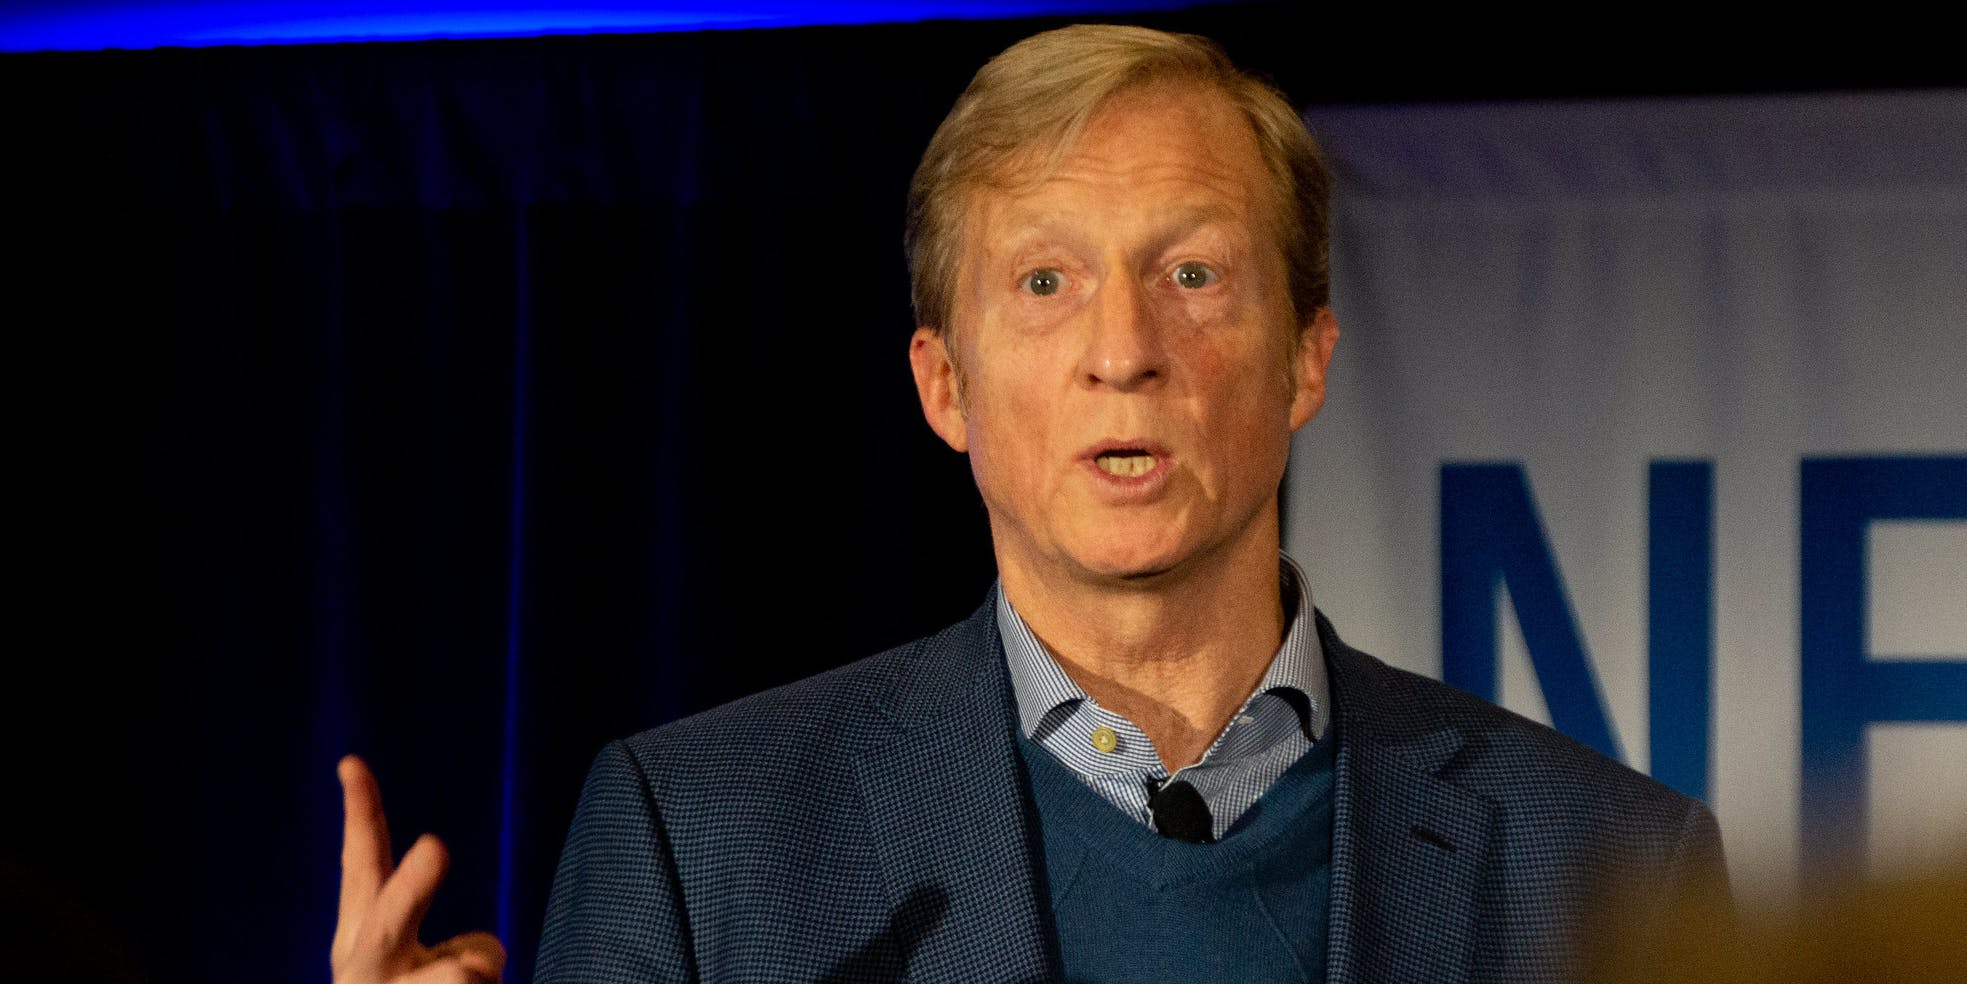 who is Tom Steyer 2020